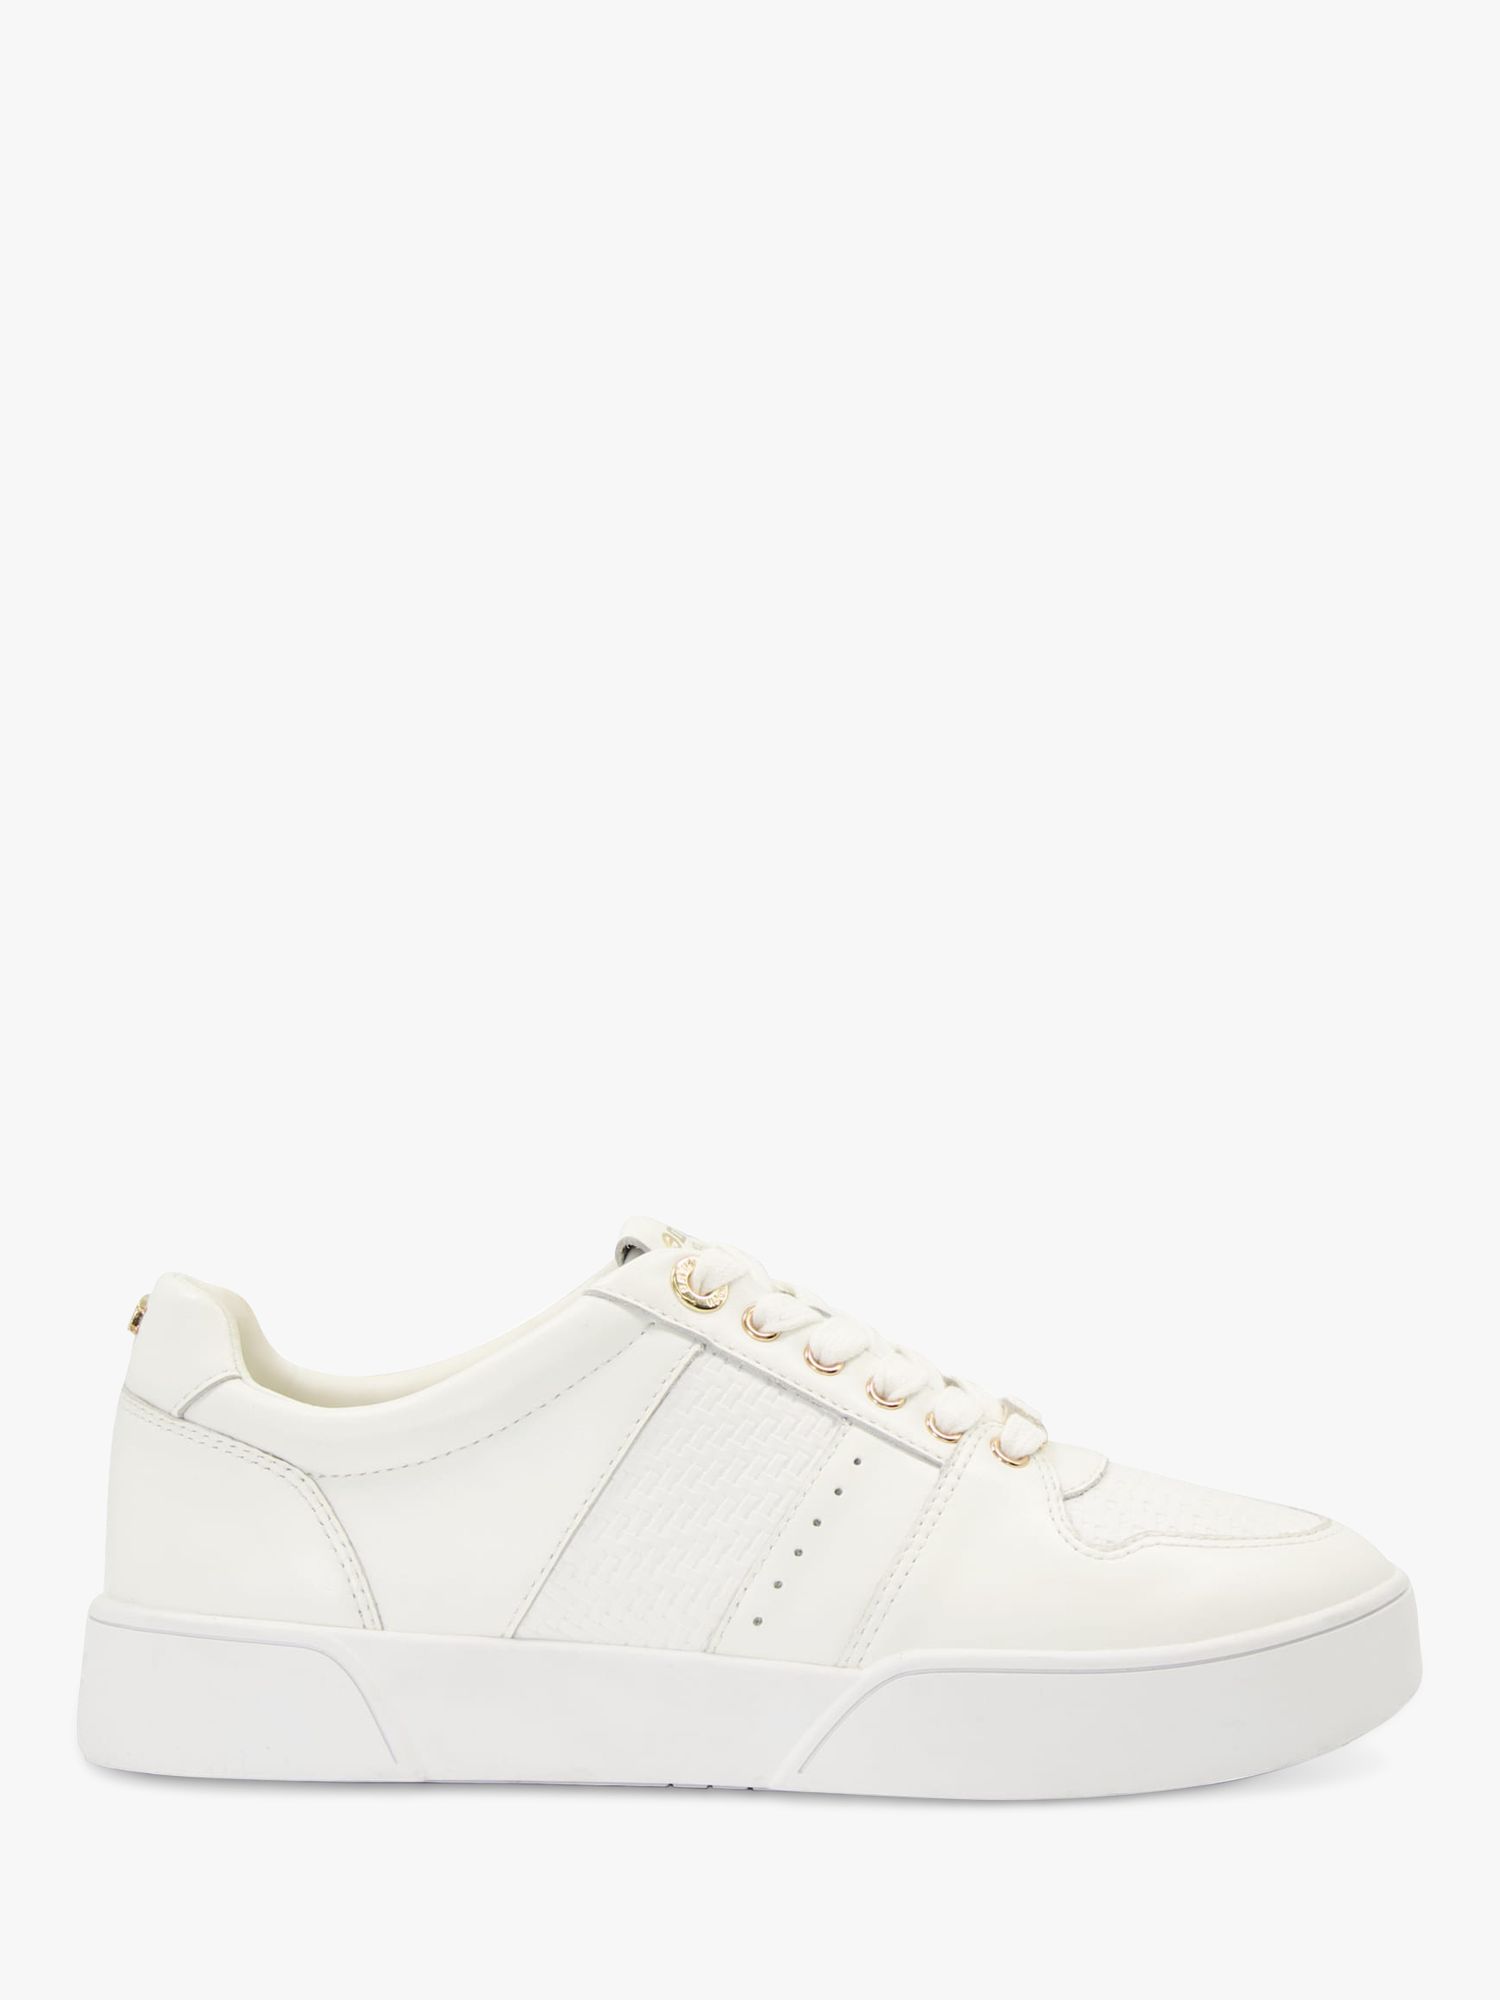 Dune Elysium Leather Side Stripe Trainers, White at John Lewis & Partners